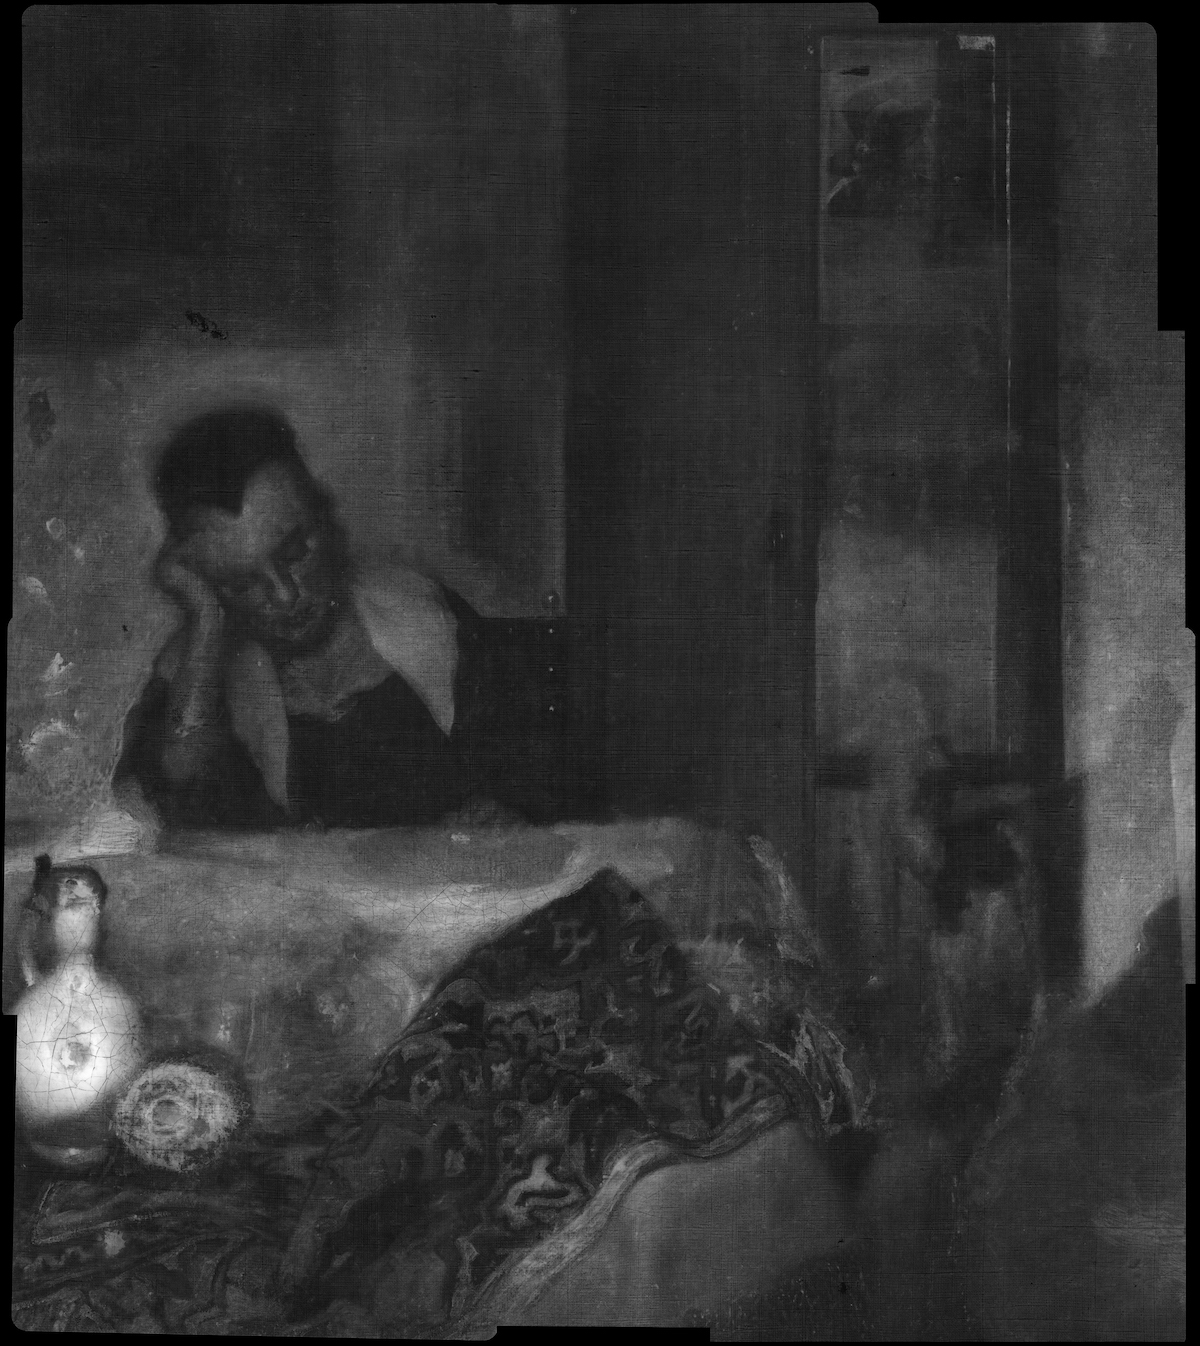 A black-and-white scan of a woman asleep at a table that has a jug and a fabric on it. Nearby, a doorway leads to an adjacent room. In that room, the faint outline of a man can be seen.